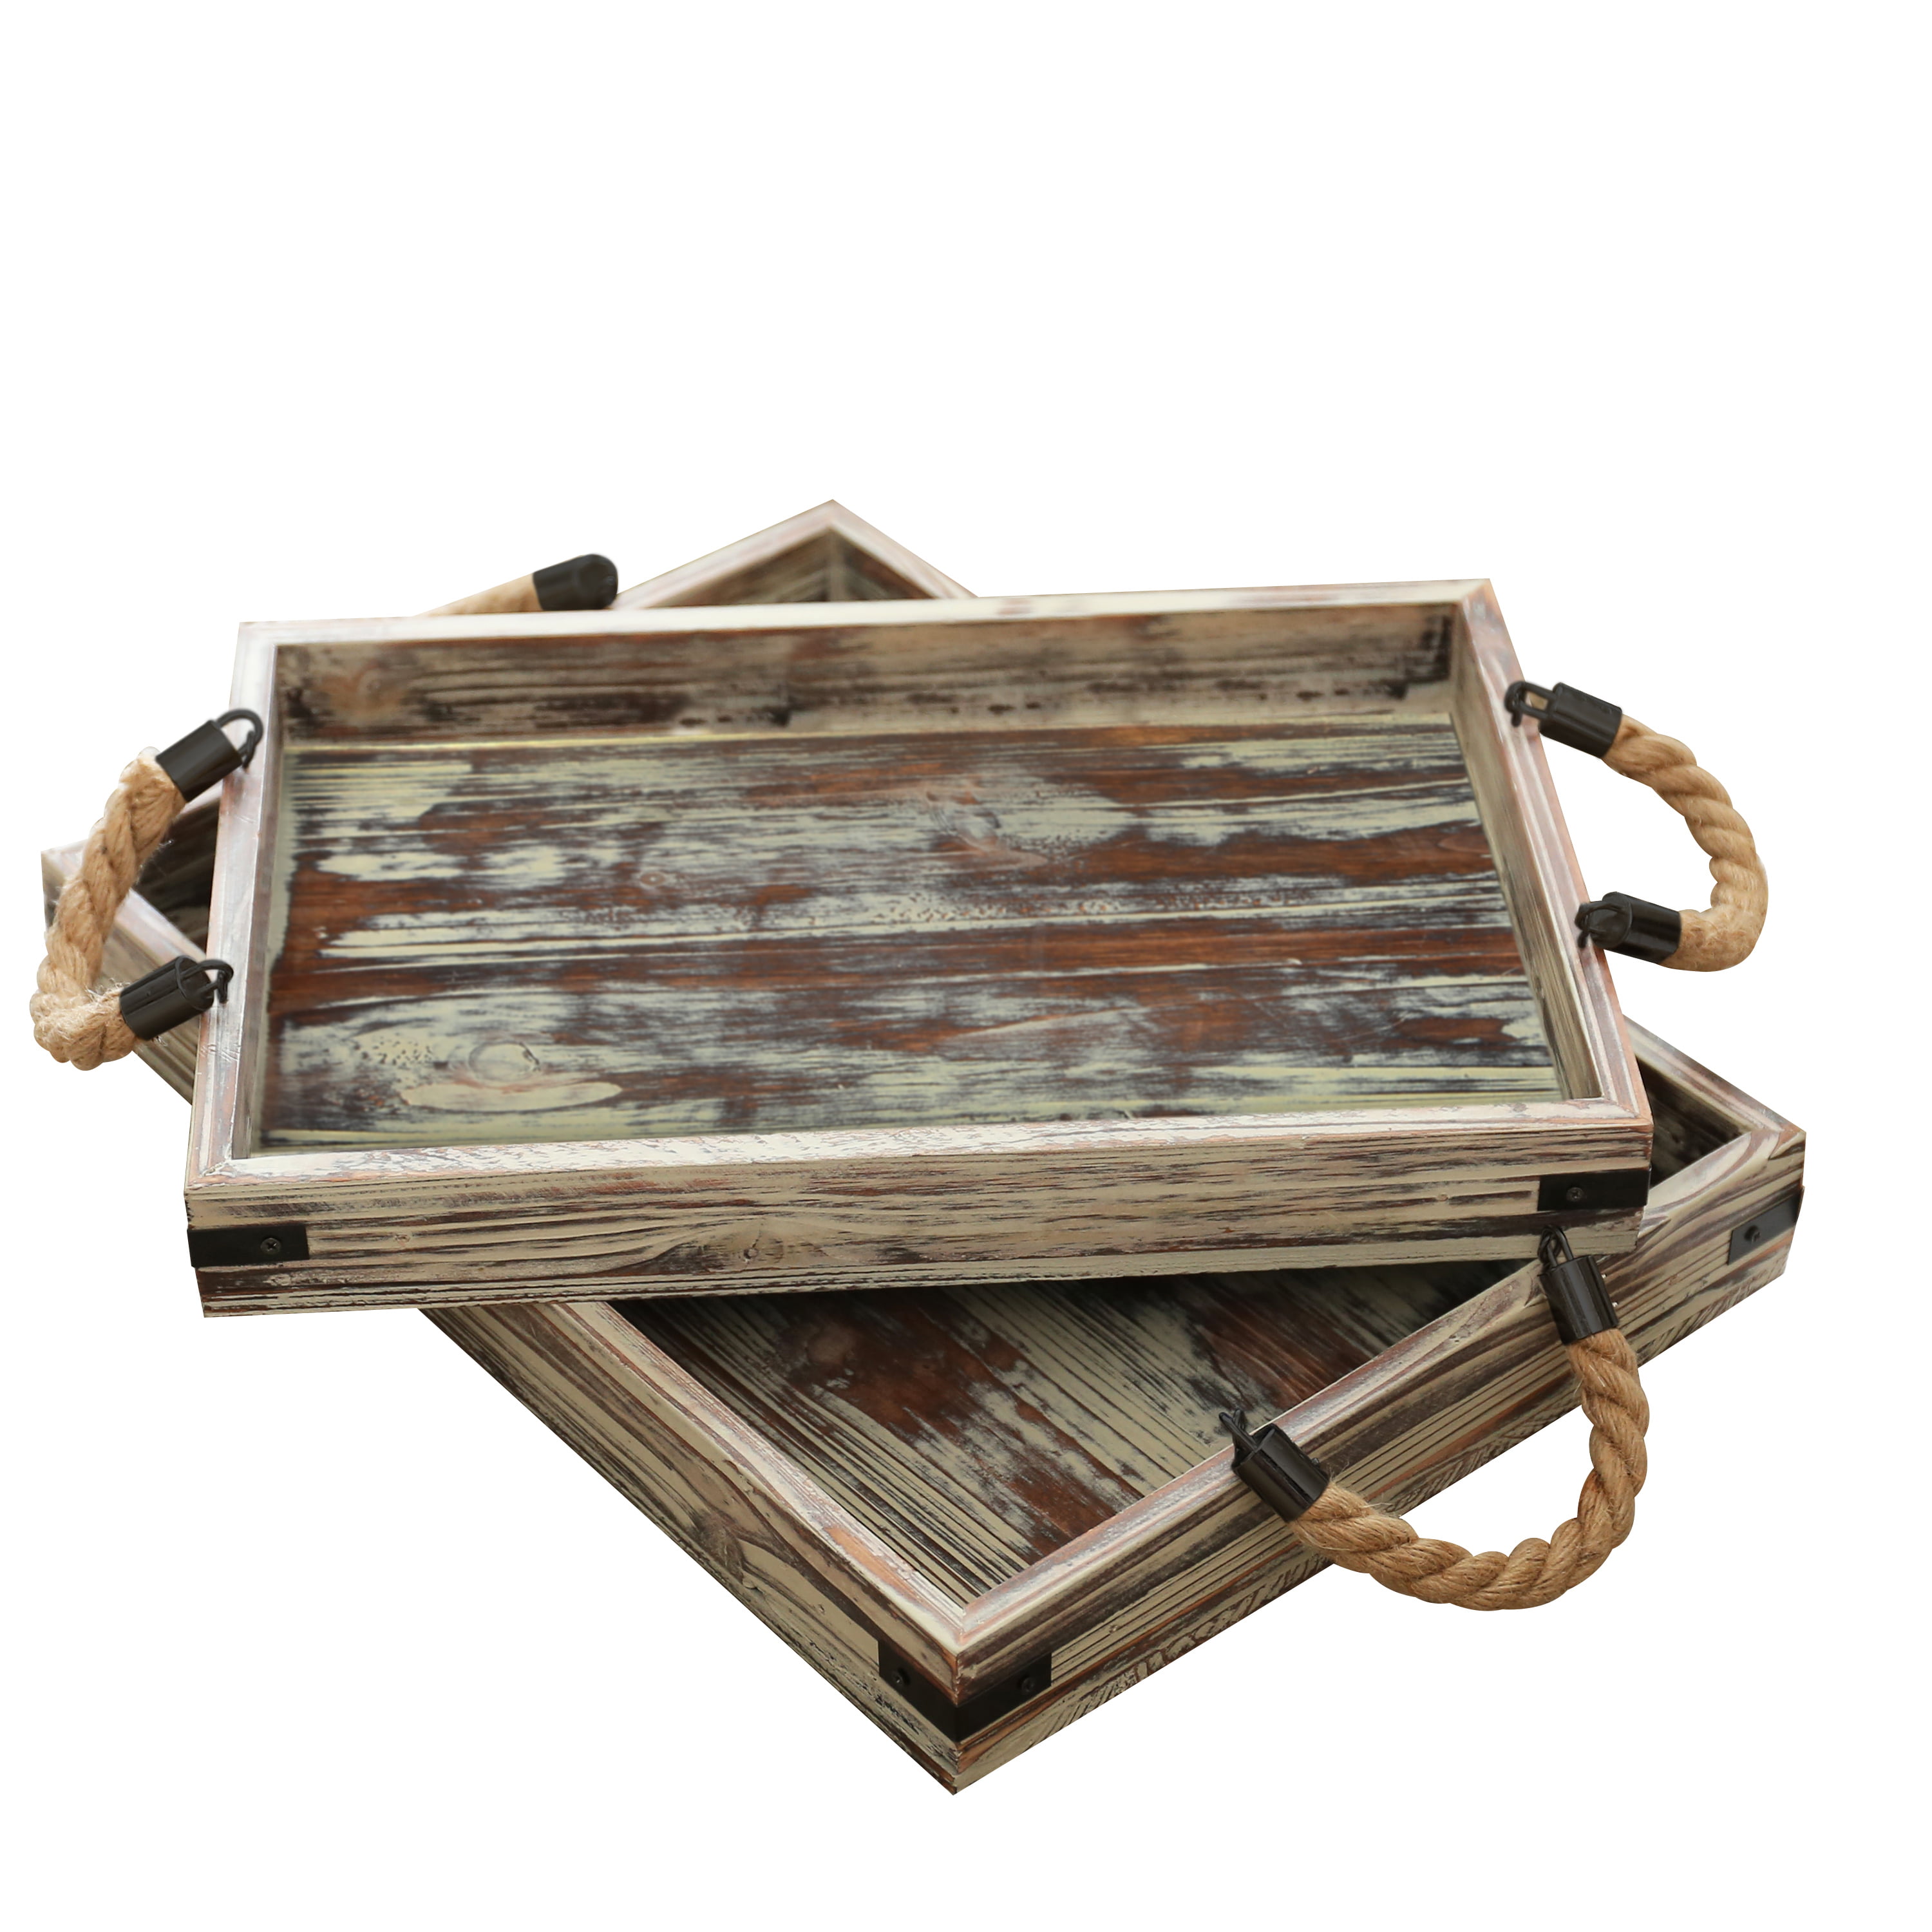 Country Rustic Wood Coffee Tray Set of 2 with Rope Handles / Breakfast